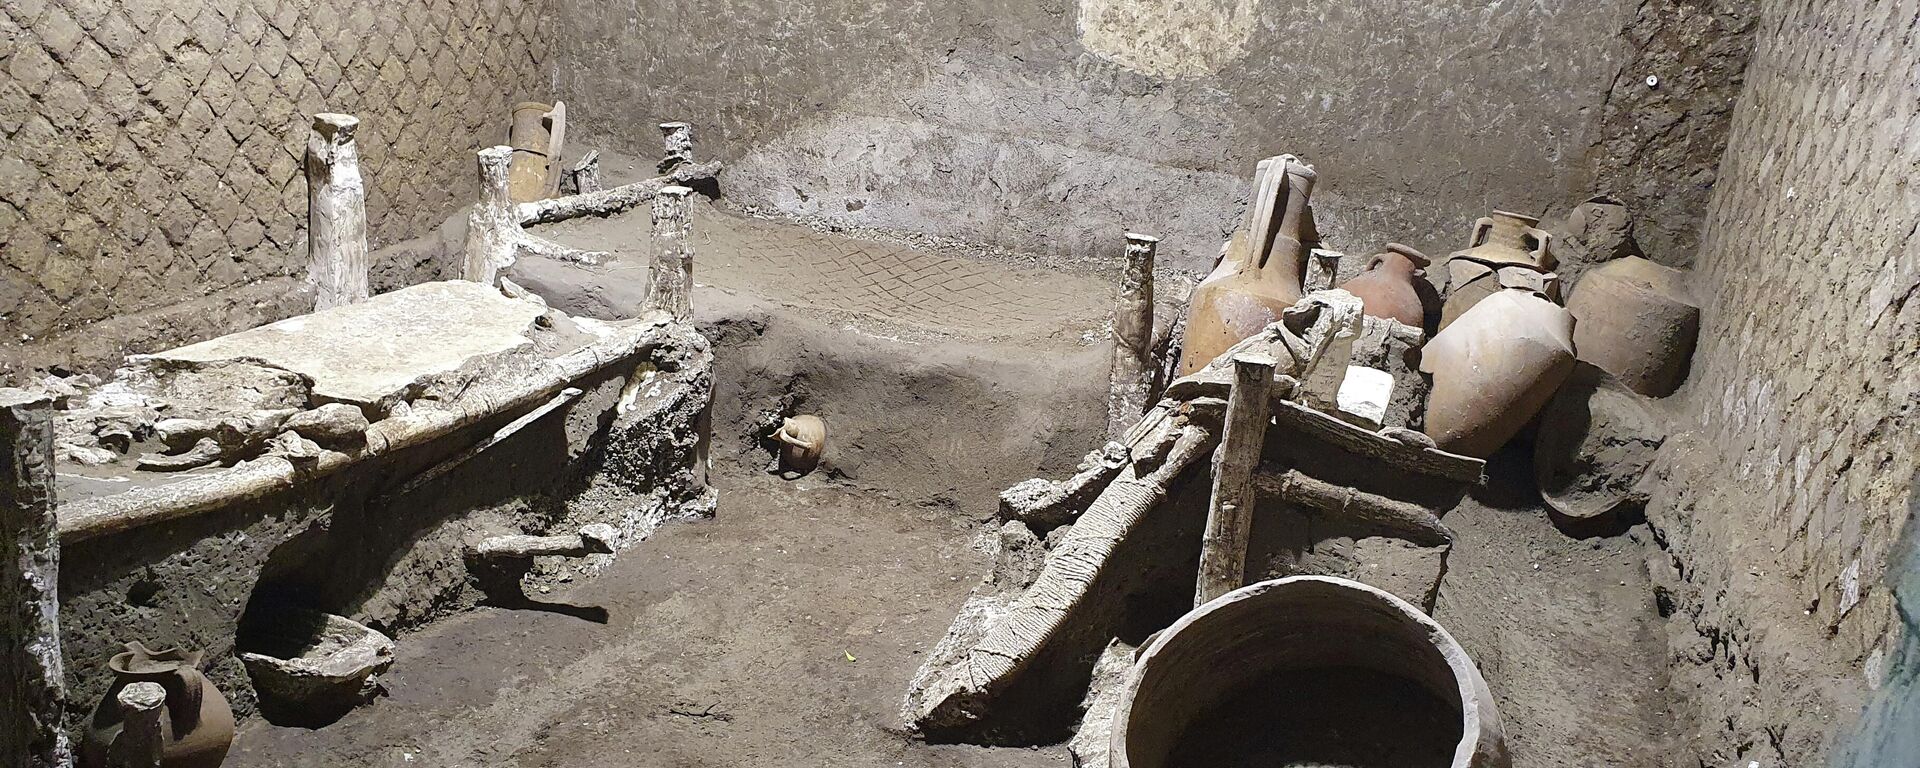 A slaves room at a Roman villa, containing beds, amphorae, ceramic pitchers and a chamber pot is discovered in a dig near the ancient Roman city of Pompeii, destroyed in 79 AD in volcanic eruption, Italy, 2021. - Sputnik International, 1920, 08.11.2021